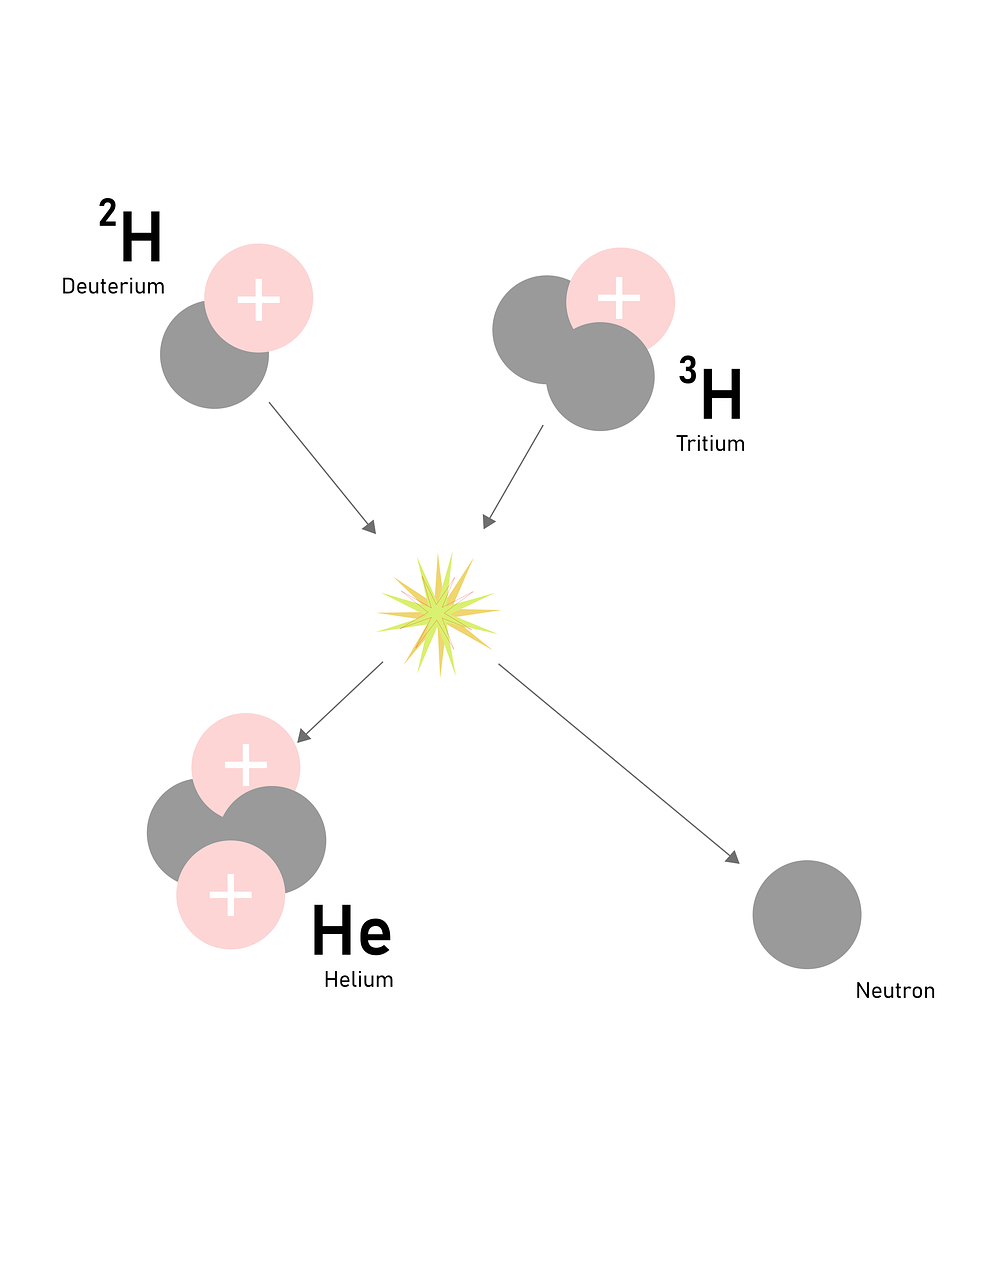 Hydrogen Nuclear Fusion Chemistry - Free image on Pixabay